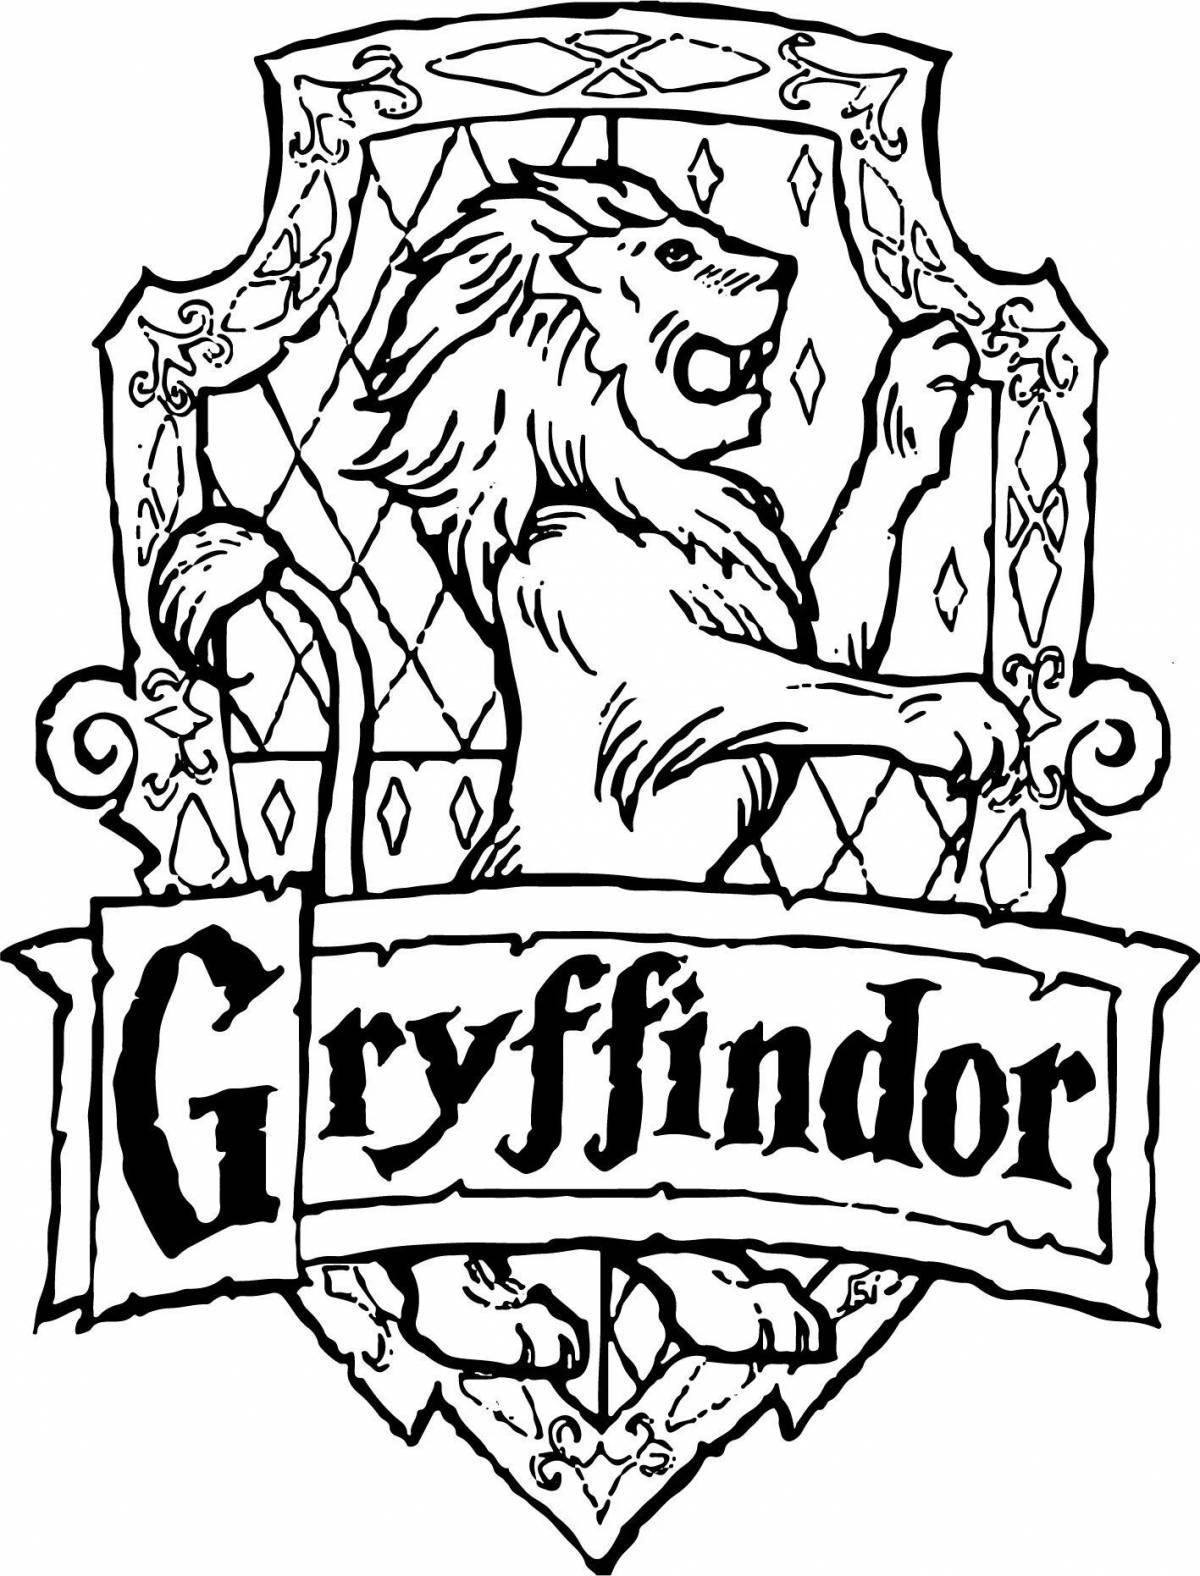 Coloring pages of colorful Hogwarts houses